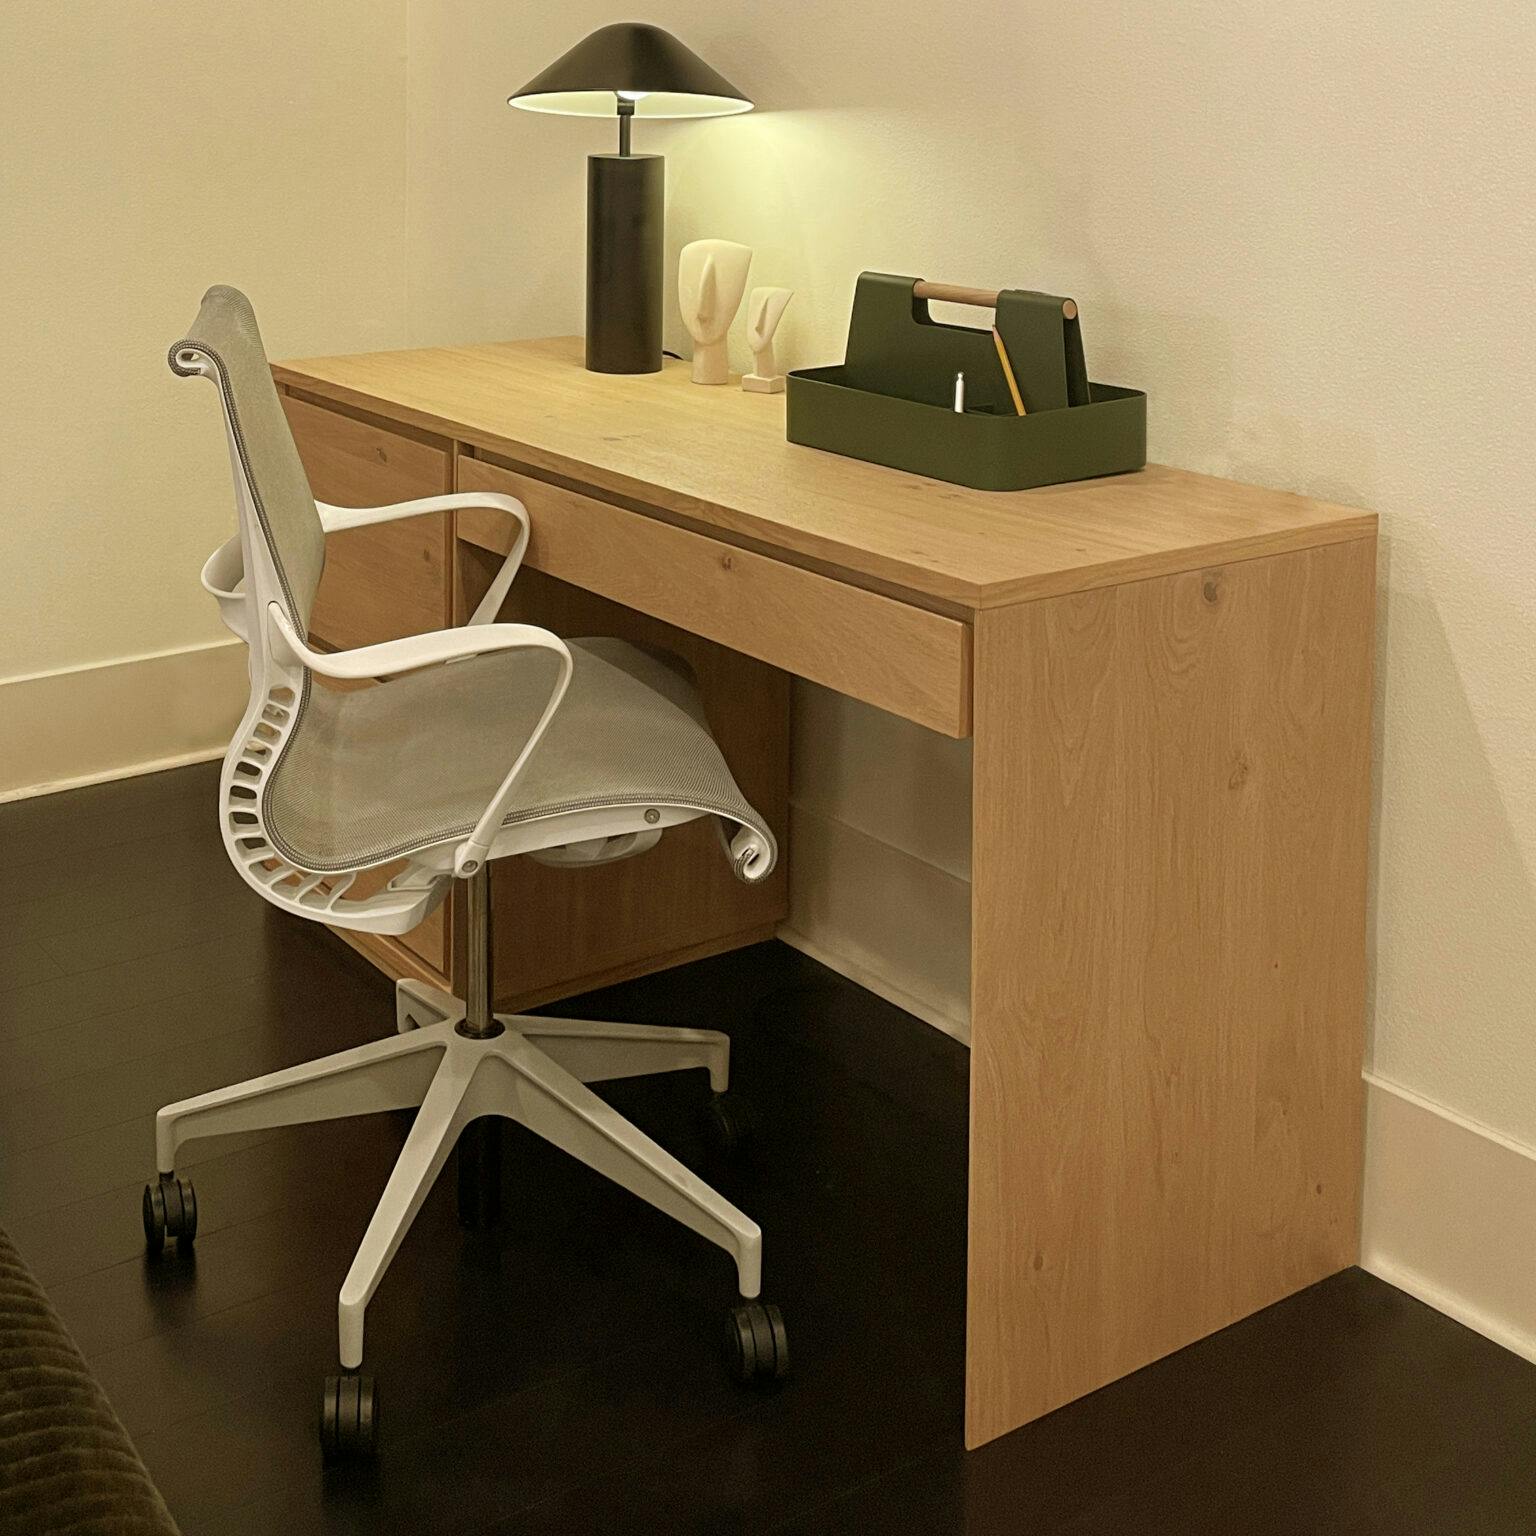 White chair with wooden desk